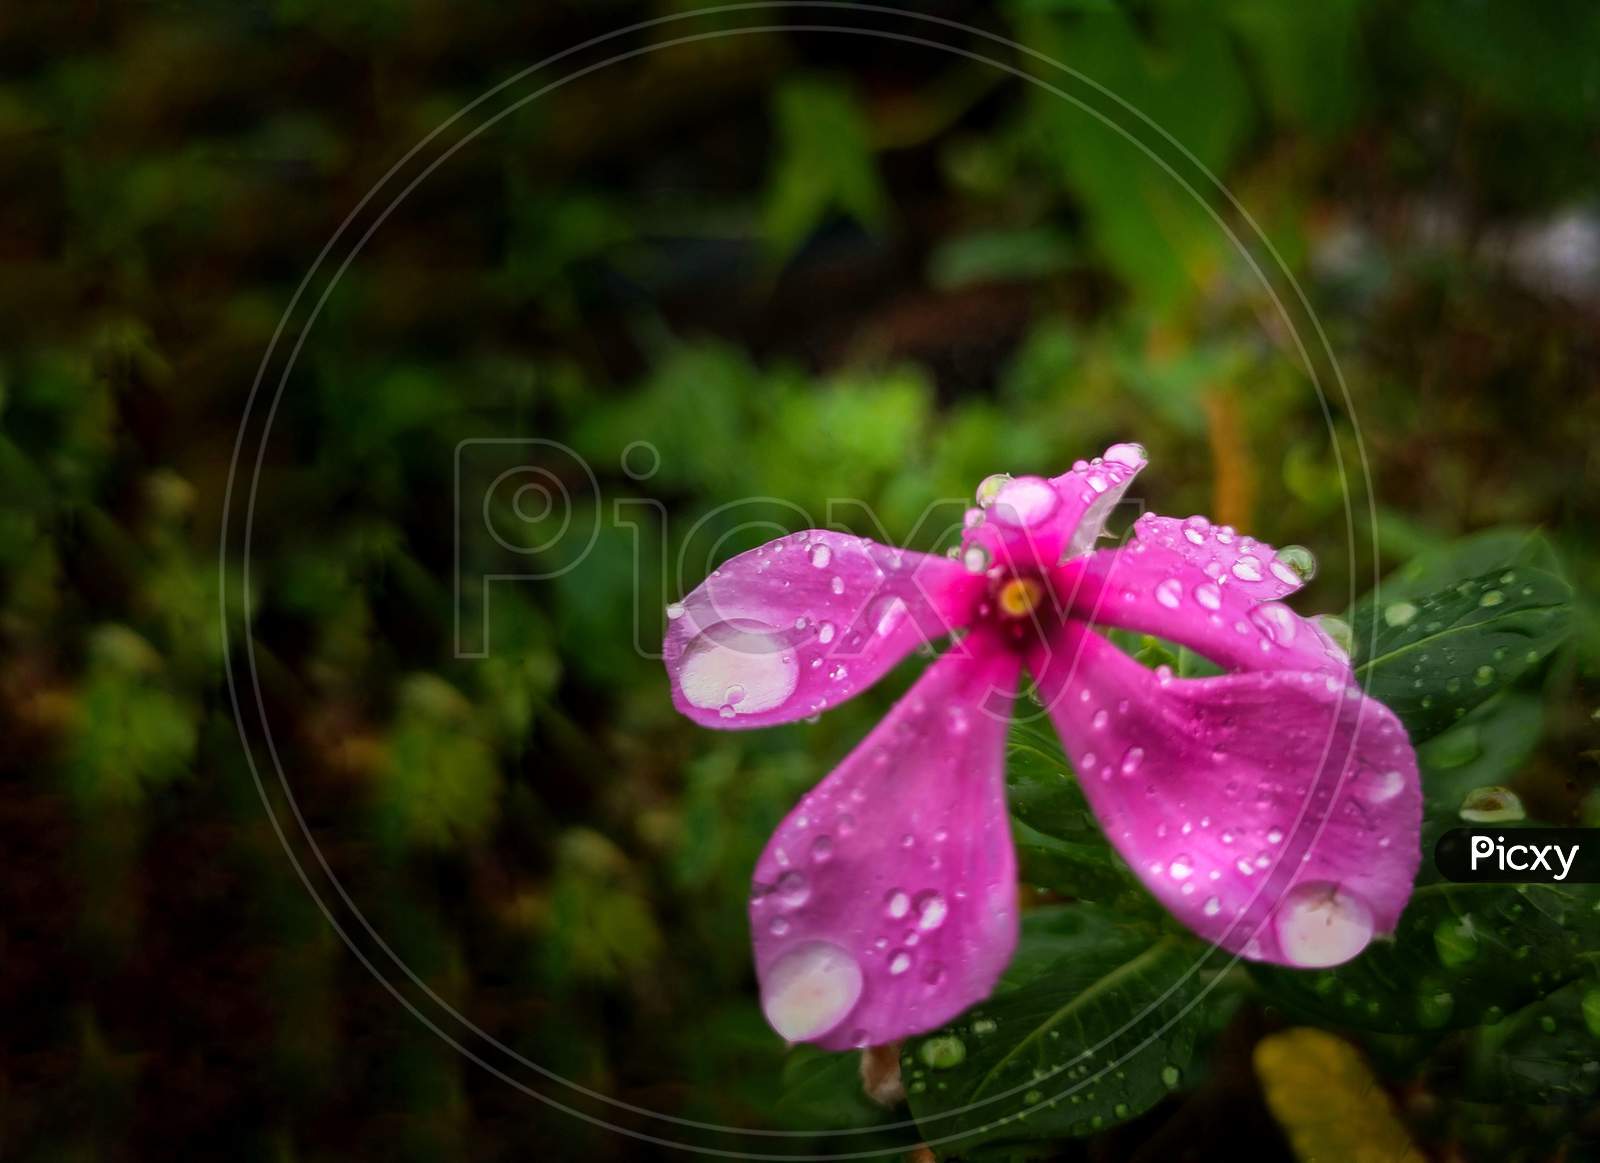 Sadabahar flower sprinkled by rain drops at the onset of monsoon